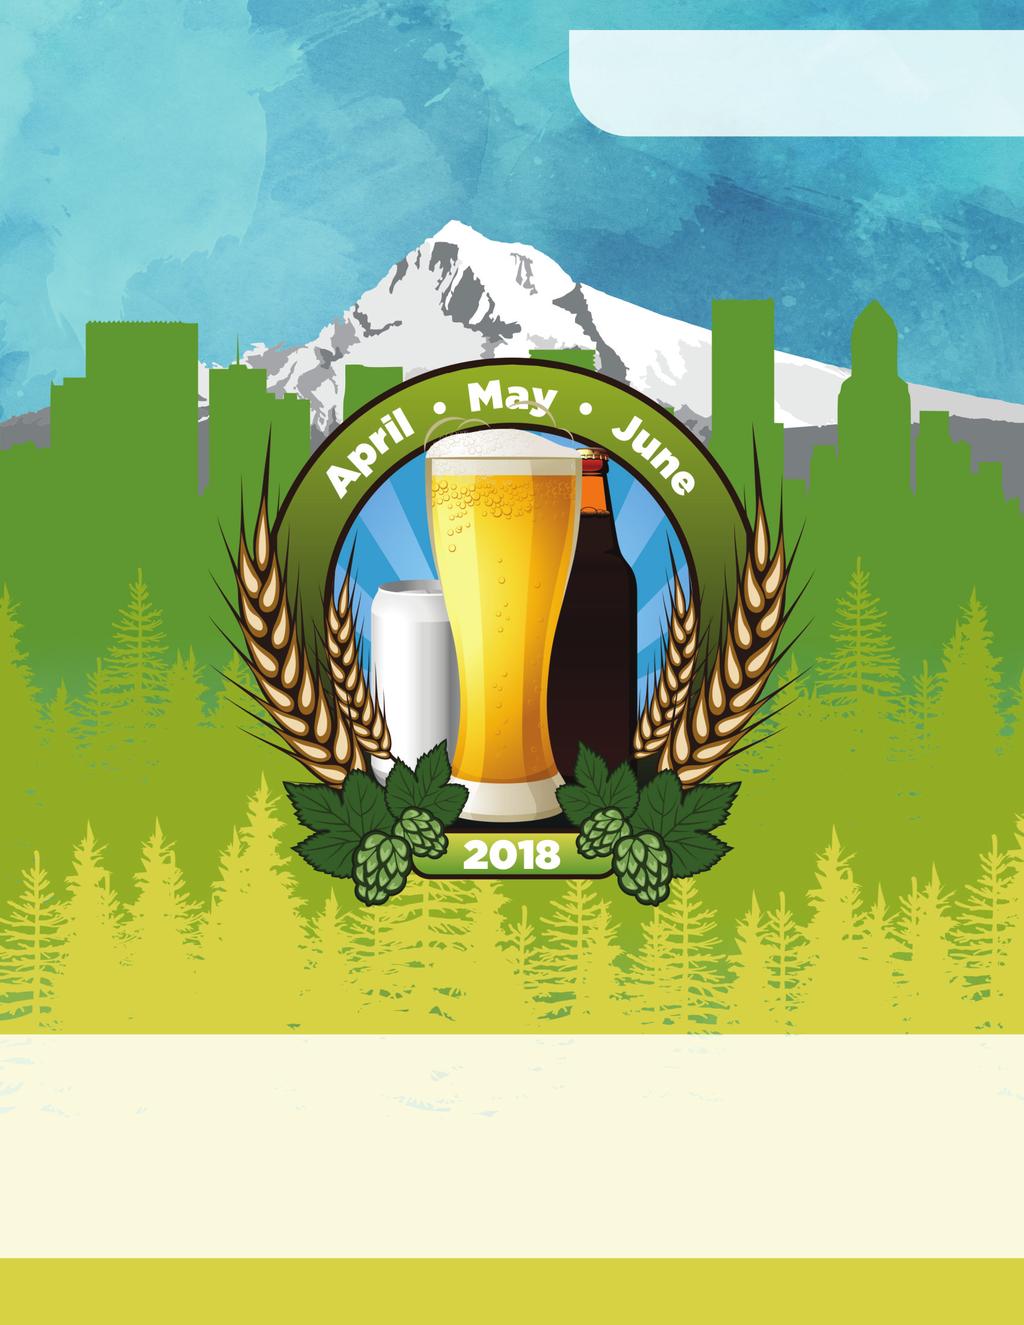 OREGON BEER & NON-ALCOHOLIC PRICE BOOK Maletis Beverage is a local, family owned beverage distributor committed to providing the highest quality of service and products.